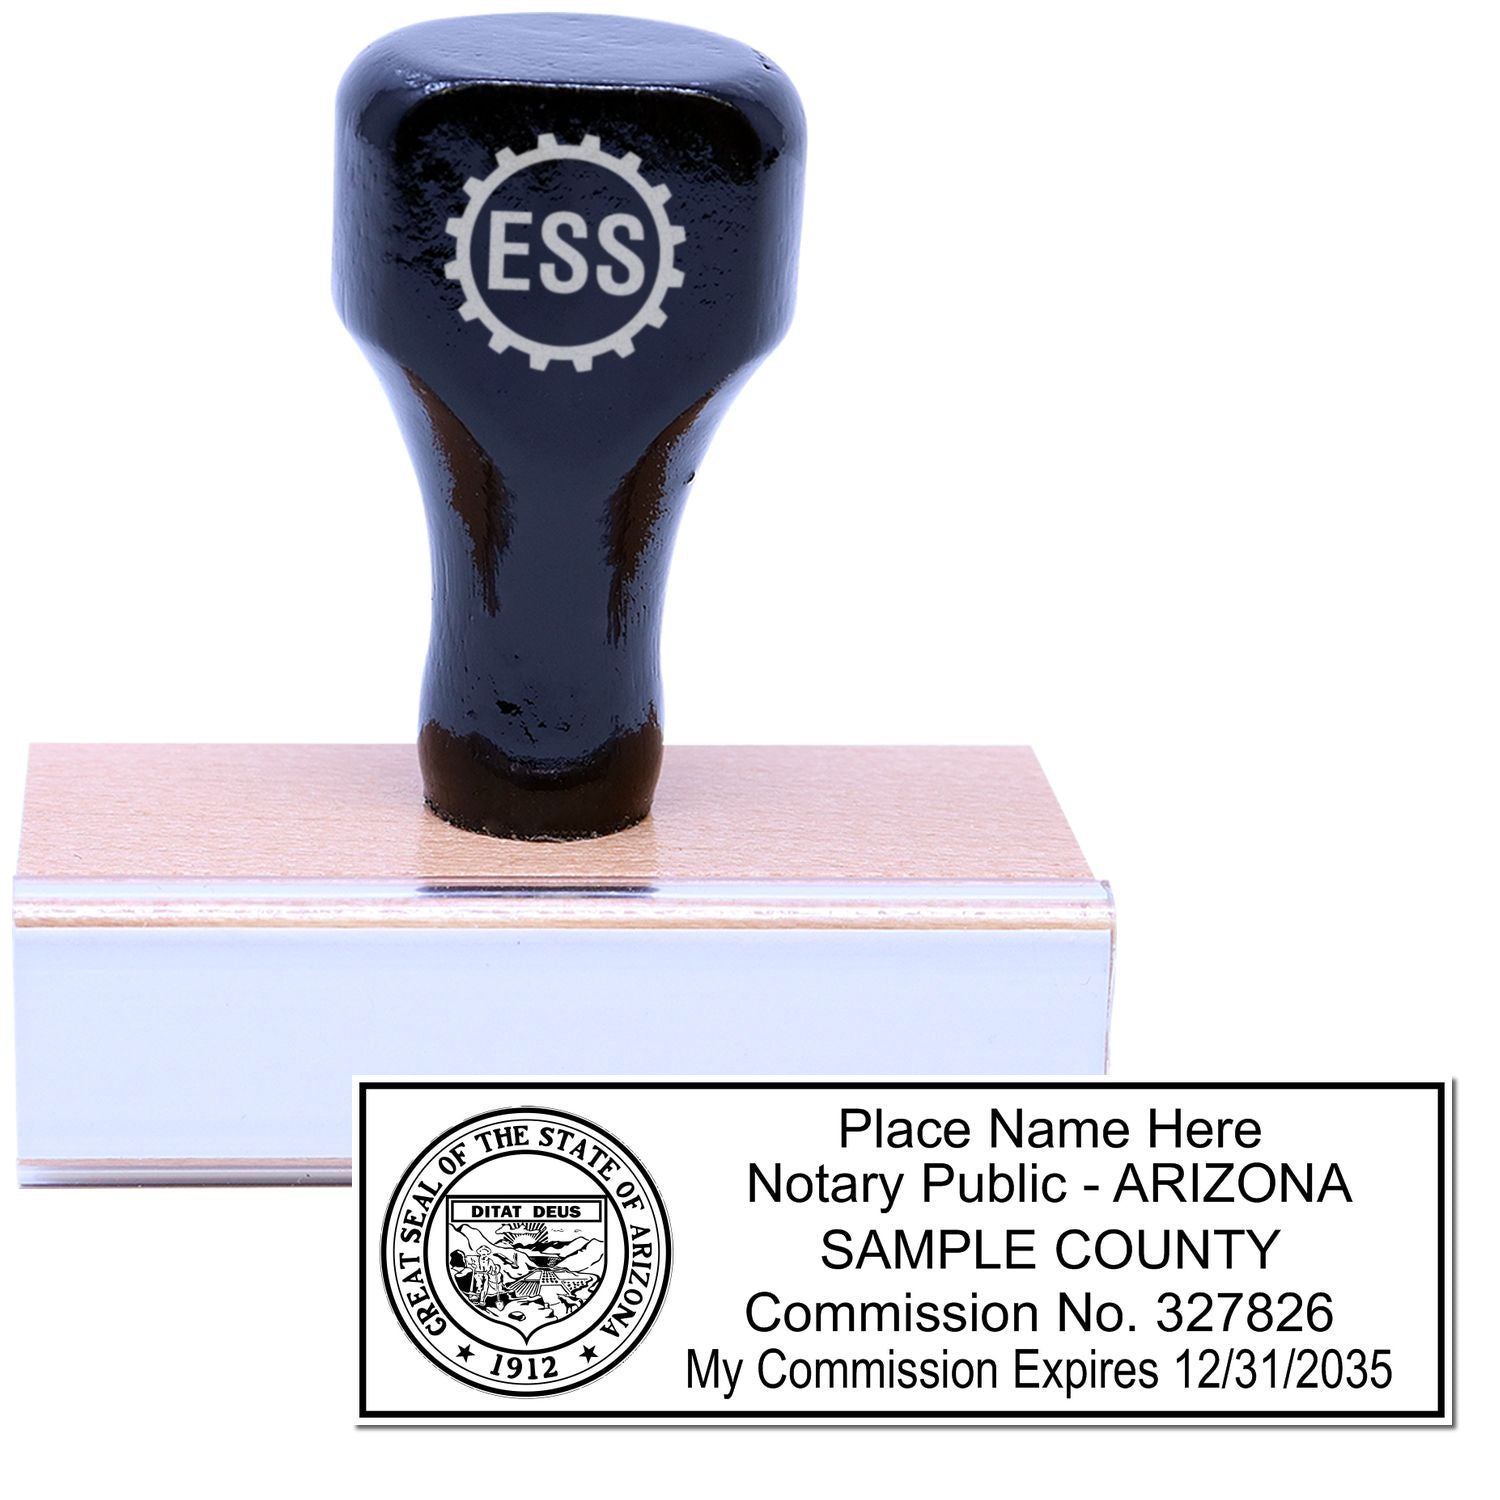 The main image for the Wooden Handle Arizona State Seal Notary Public Stamp depicting a sample of the imprint and electronic files